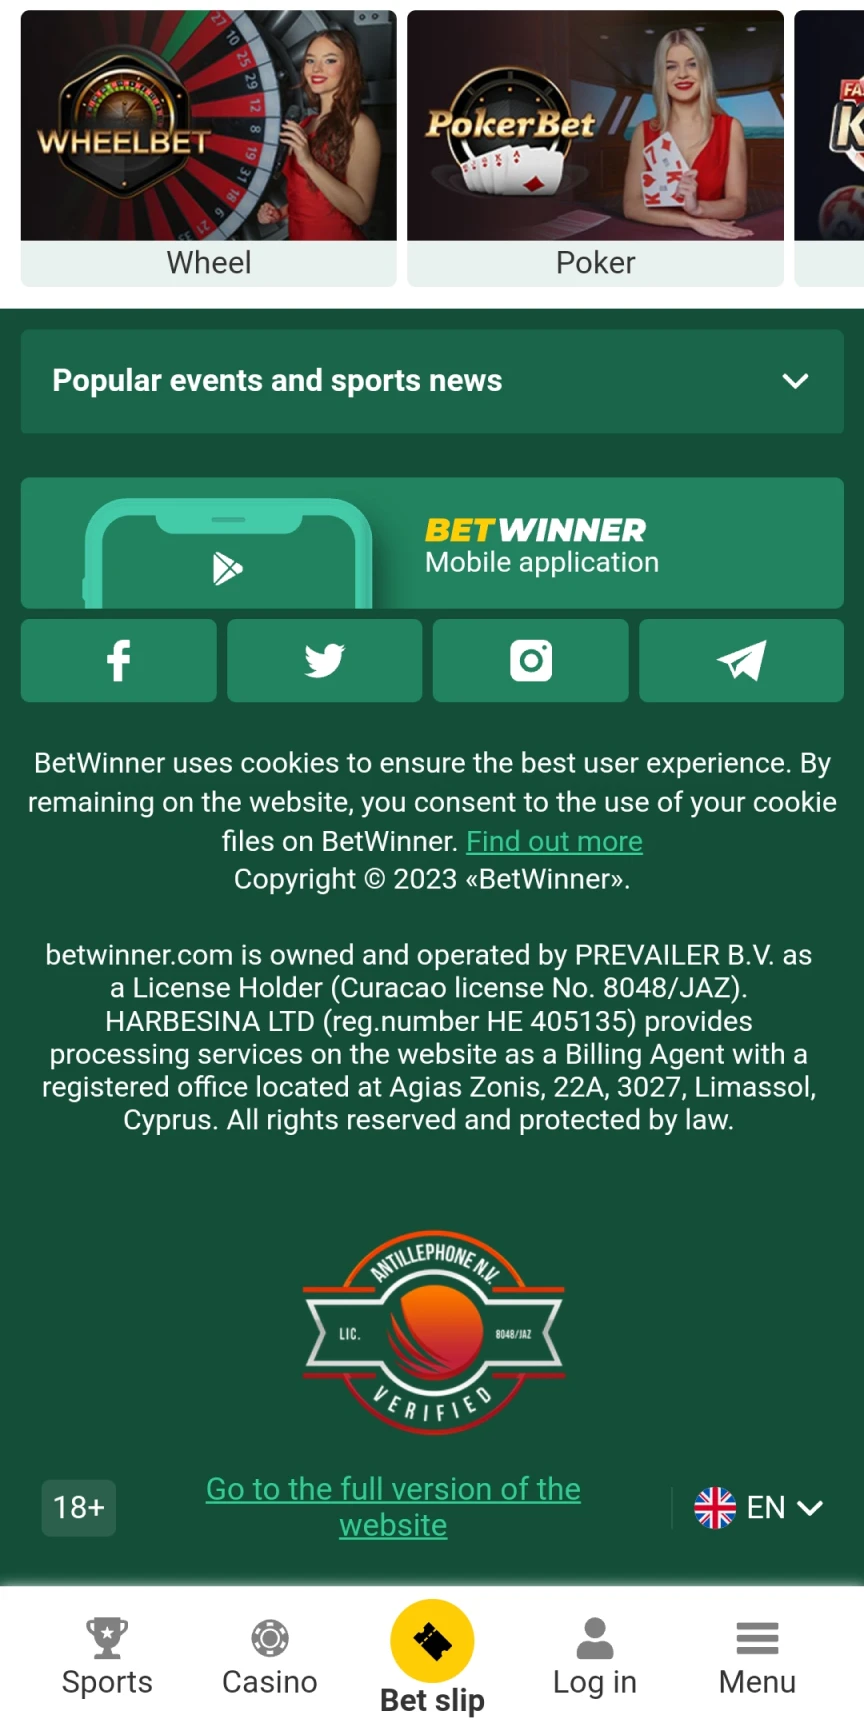 Click on the button to go to download the Betwinner application for iOS.